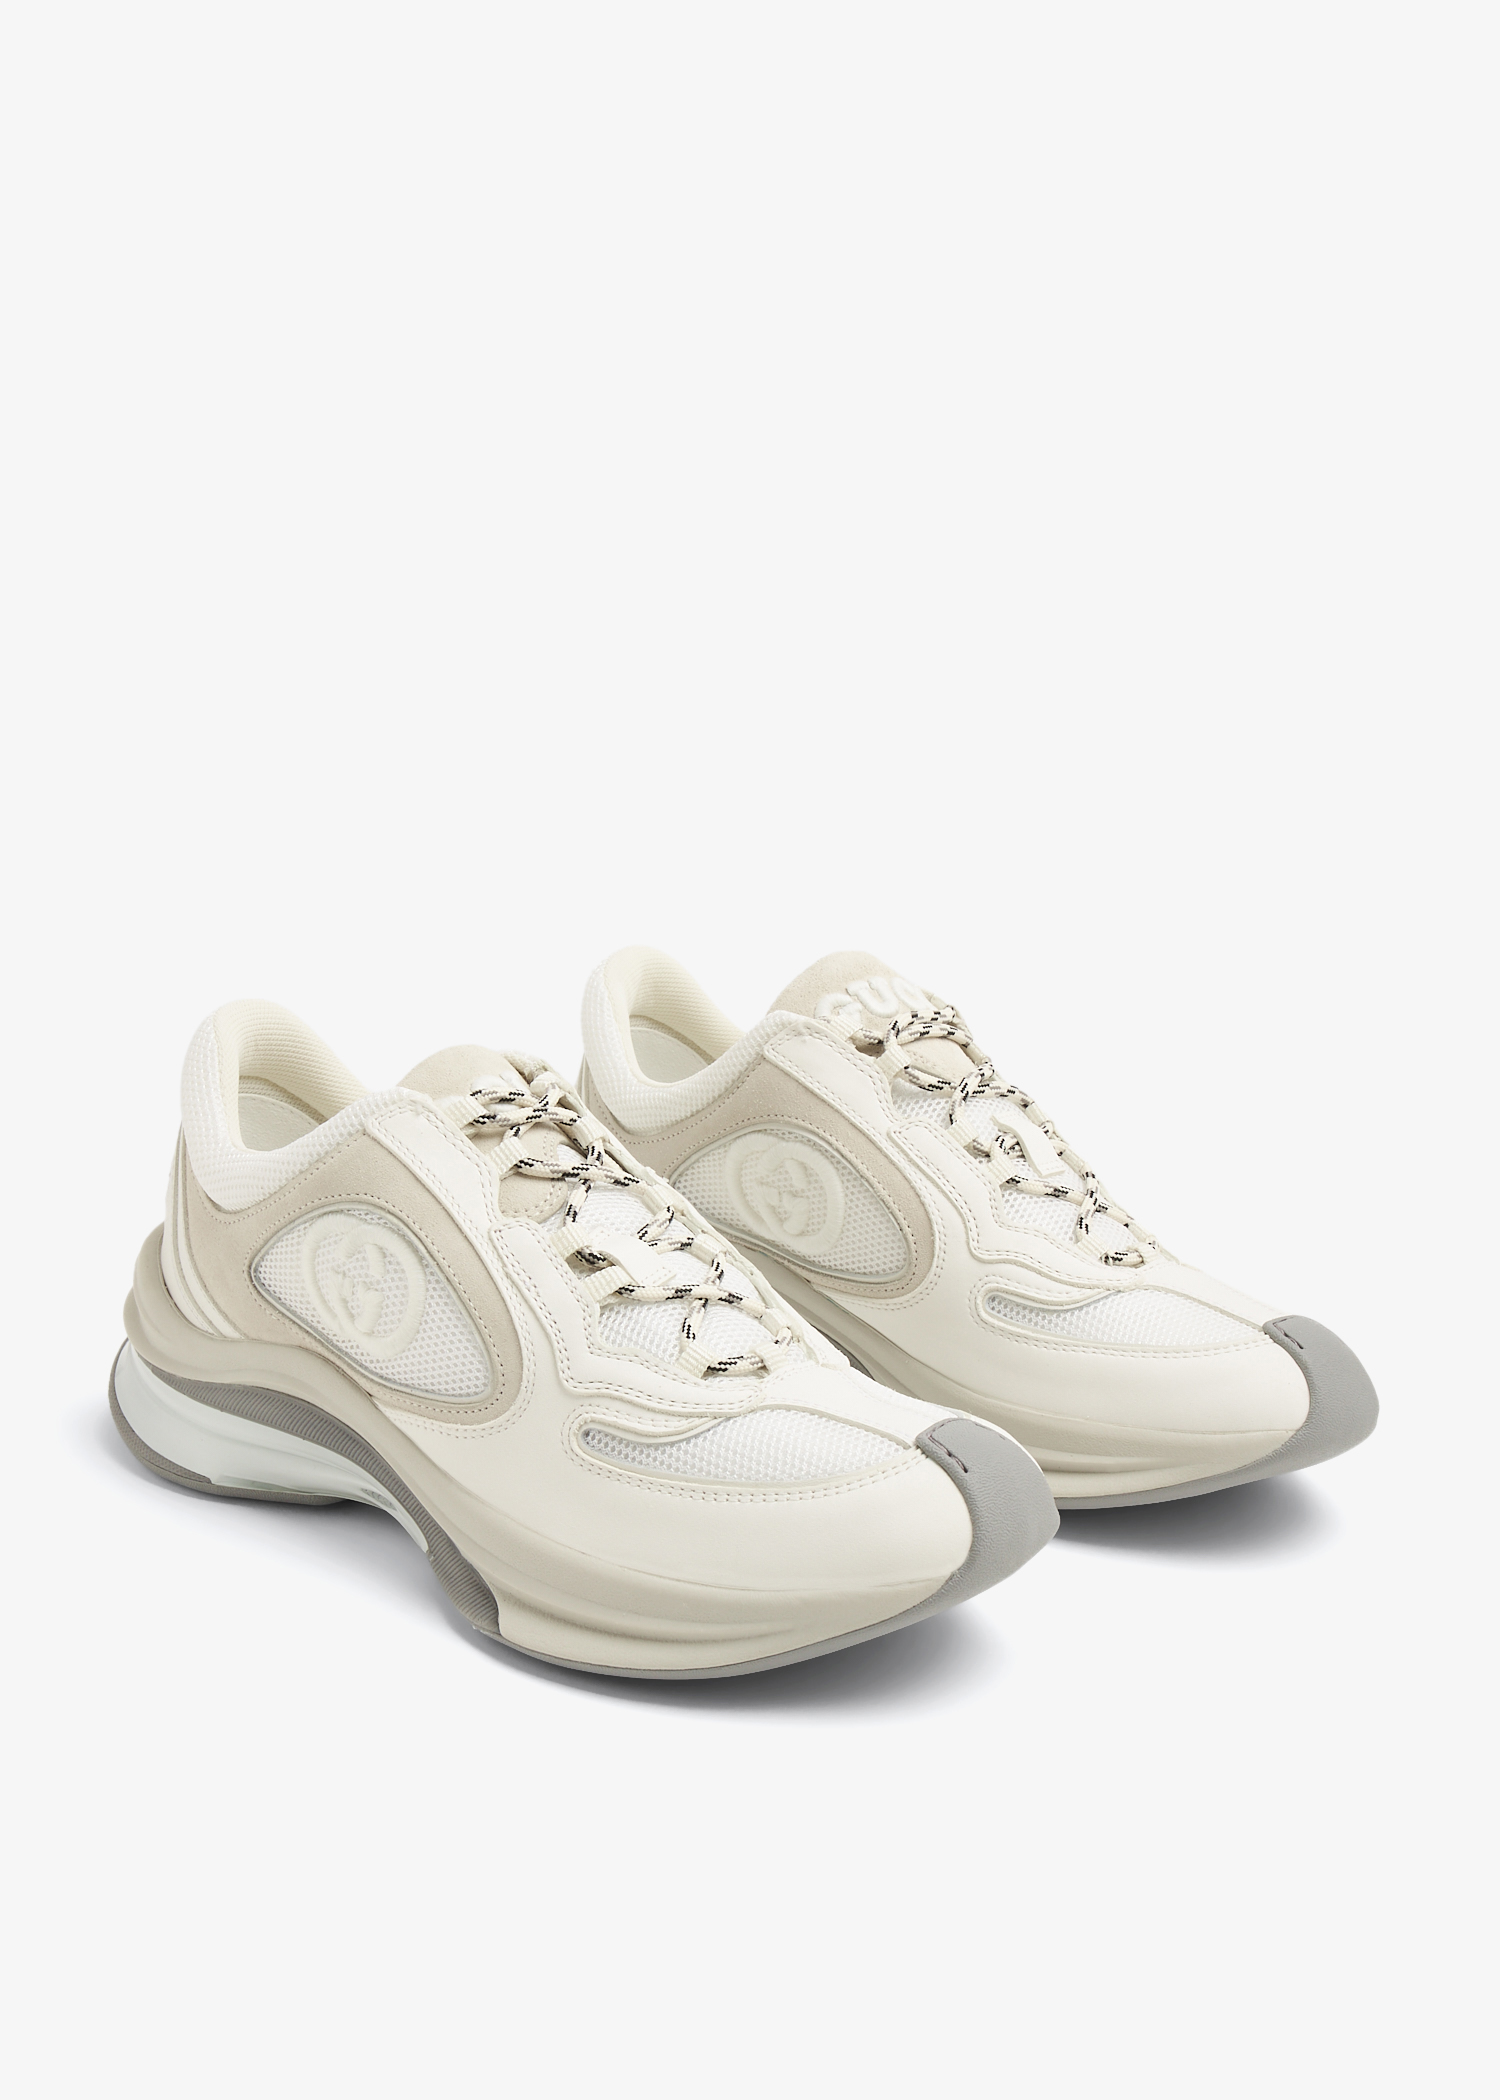 Gucci Gucci Run sneakers for Women - White in UAE | Level Shoes